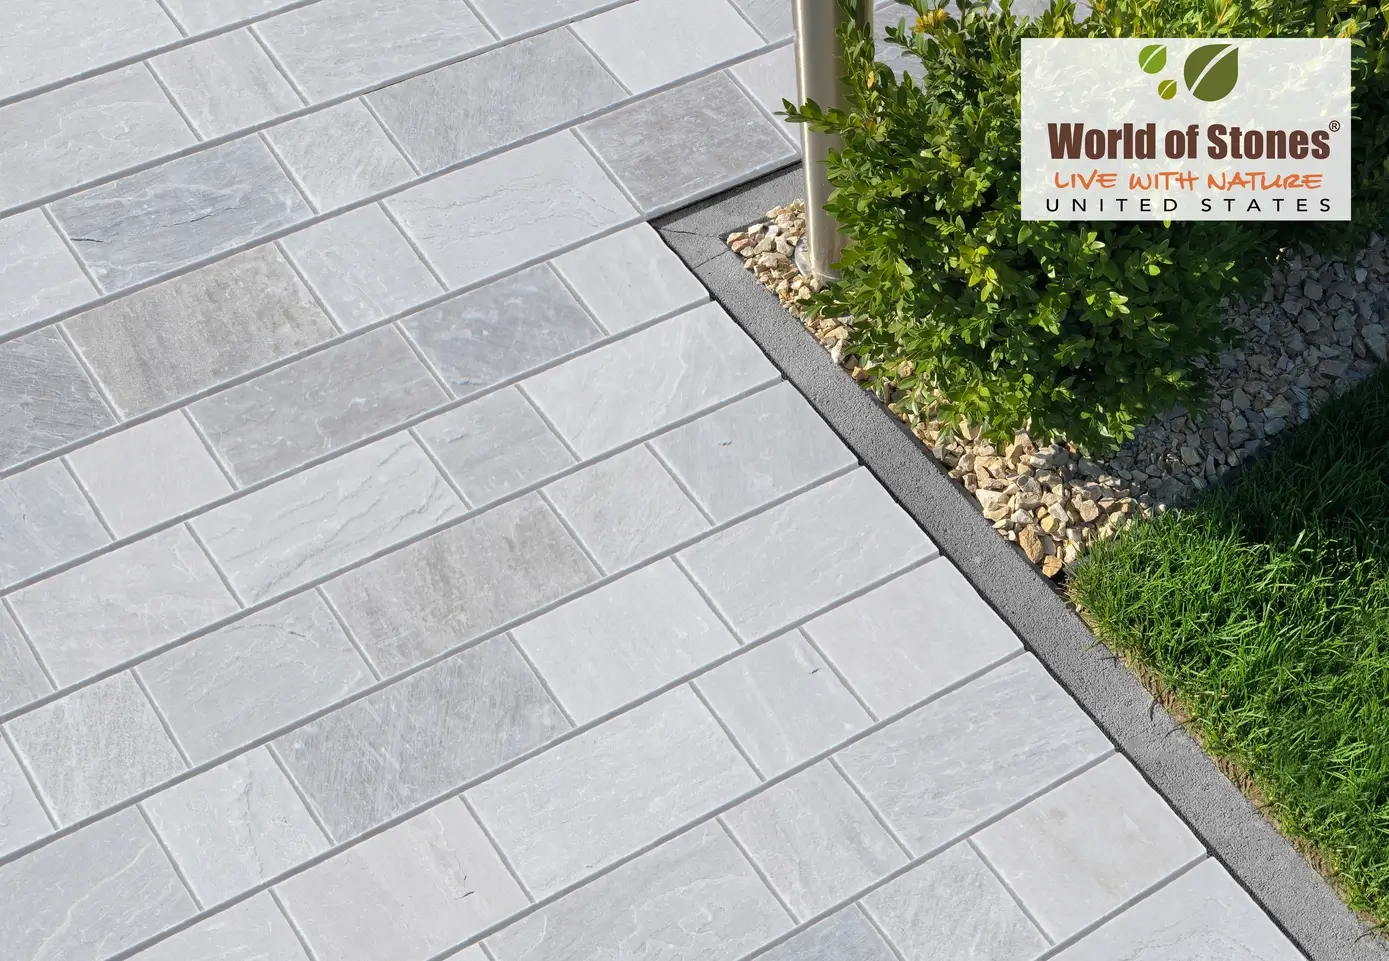 Buy Natural Paving Stones – Win iPhone 11 Pro & 10% Discount Coupon